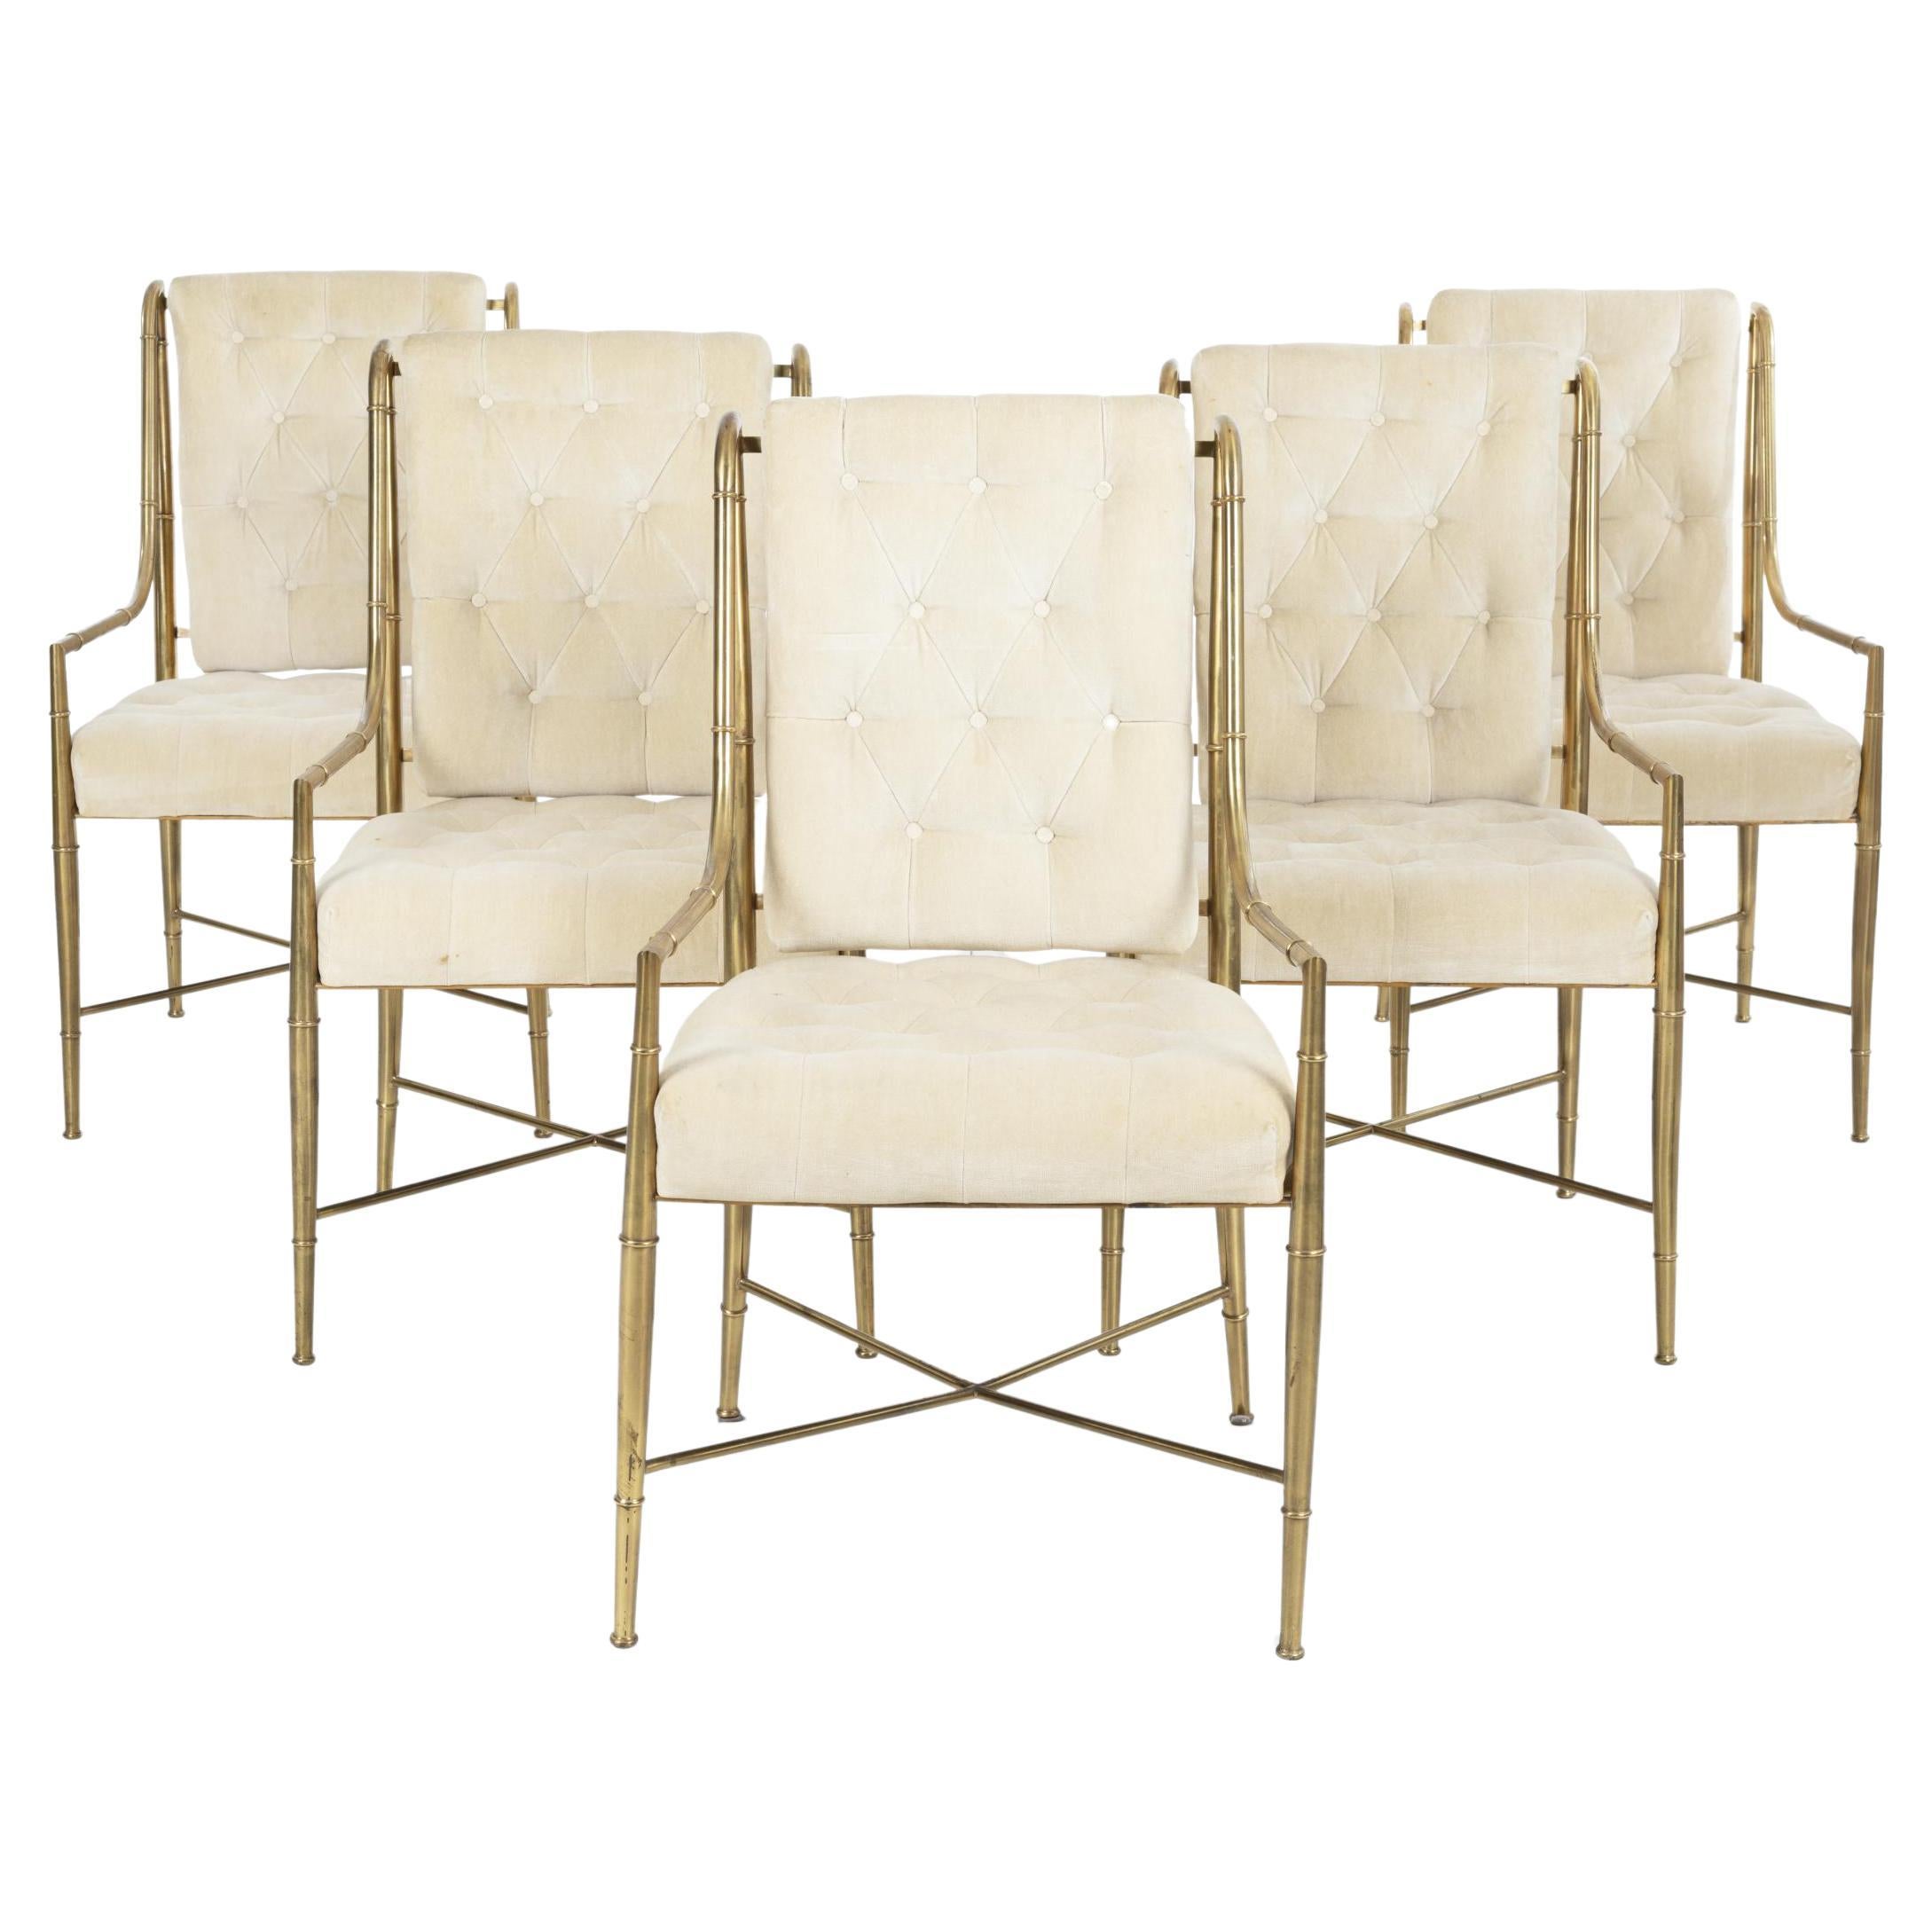 5 Mastercraft for Weiman/Warren Lloyd Dining Chairs in Tubular Brass w Arms, Set For Sale